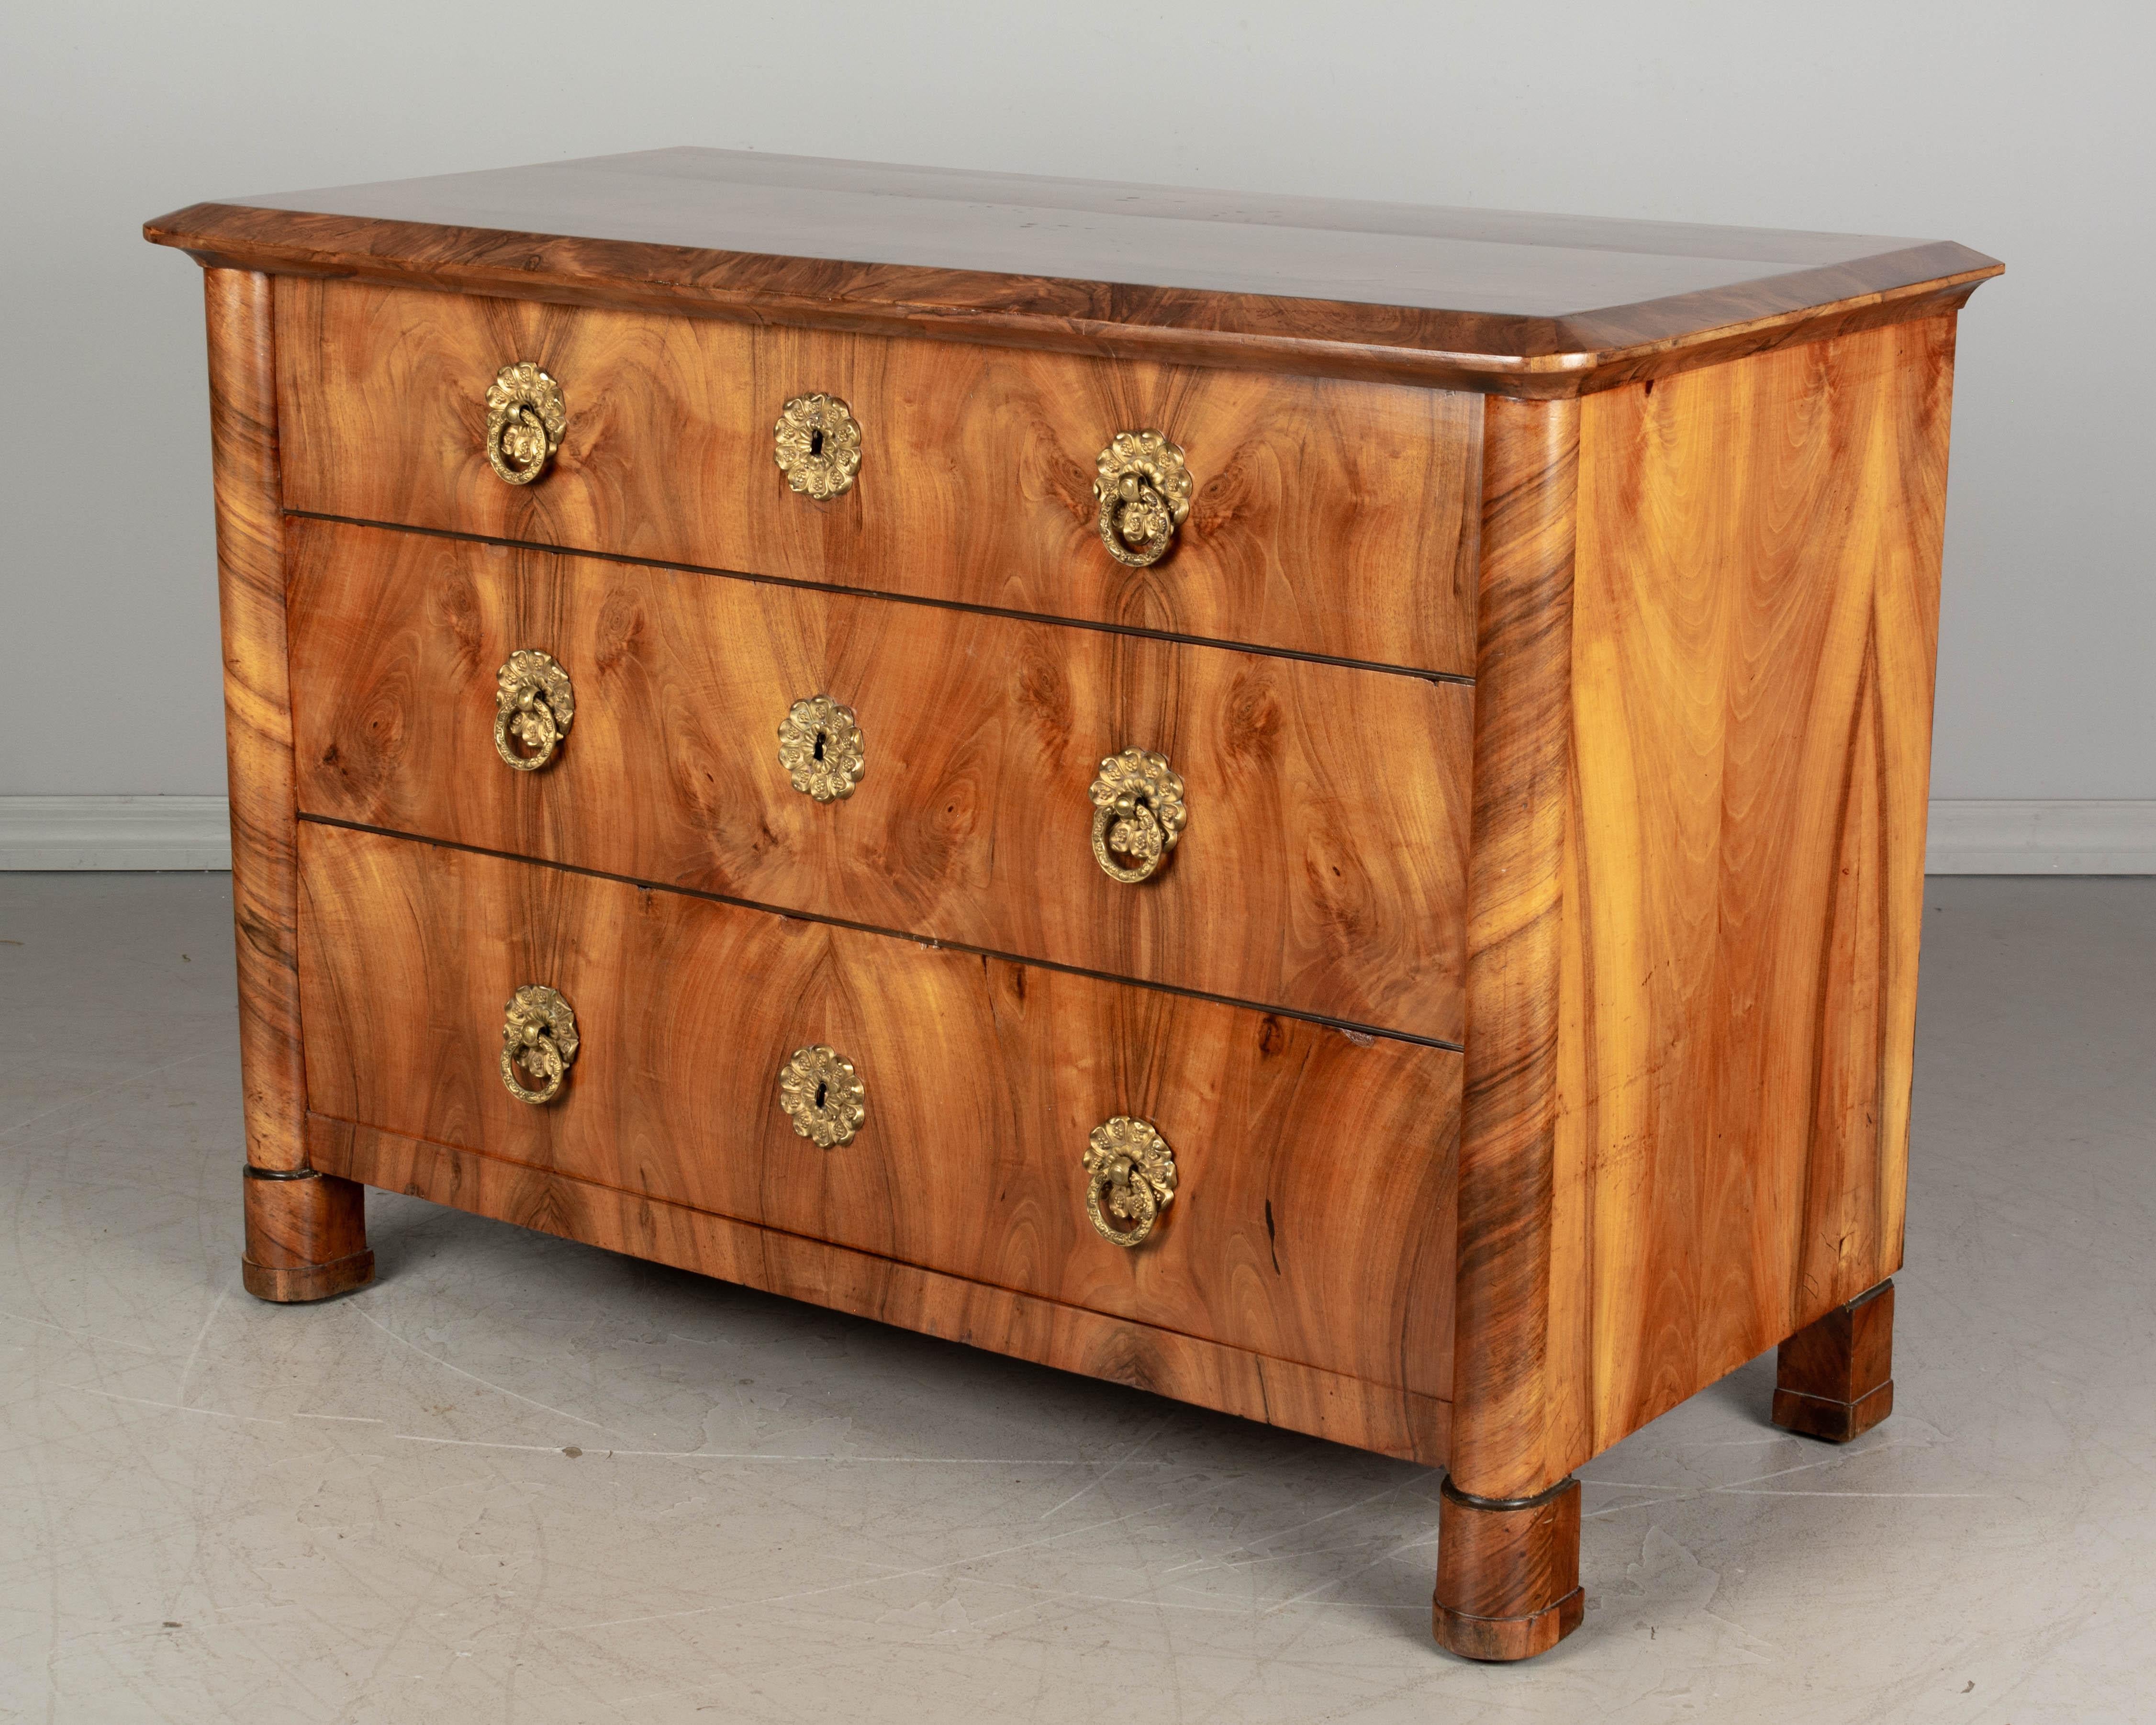 A fine 19th century Biedermeier commode from Austria made of book matched veneers of walnut over pine. Three dovetailed drawers with leaf form brass escutcheons and ring pulls. Beautiful choice of wood with swirling pattern on the front columns and